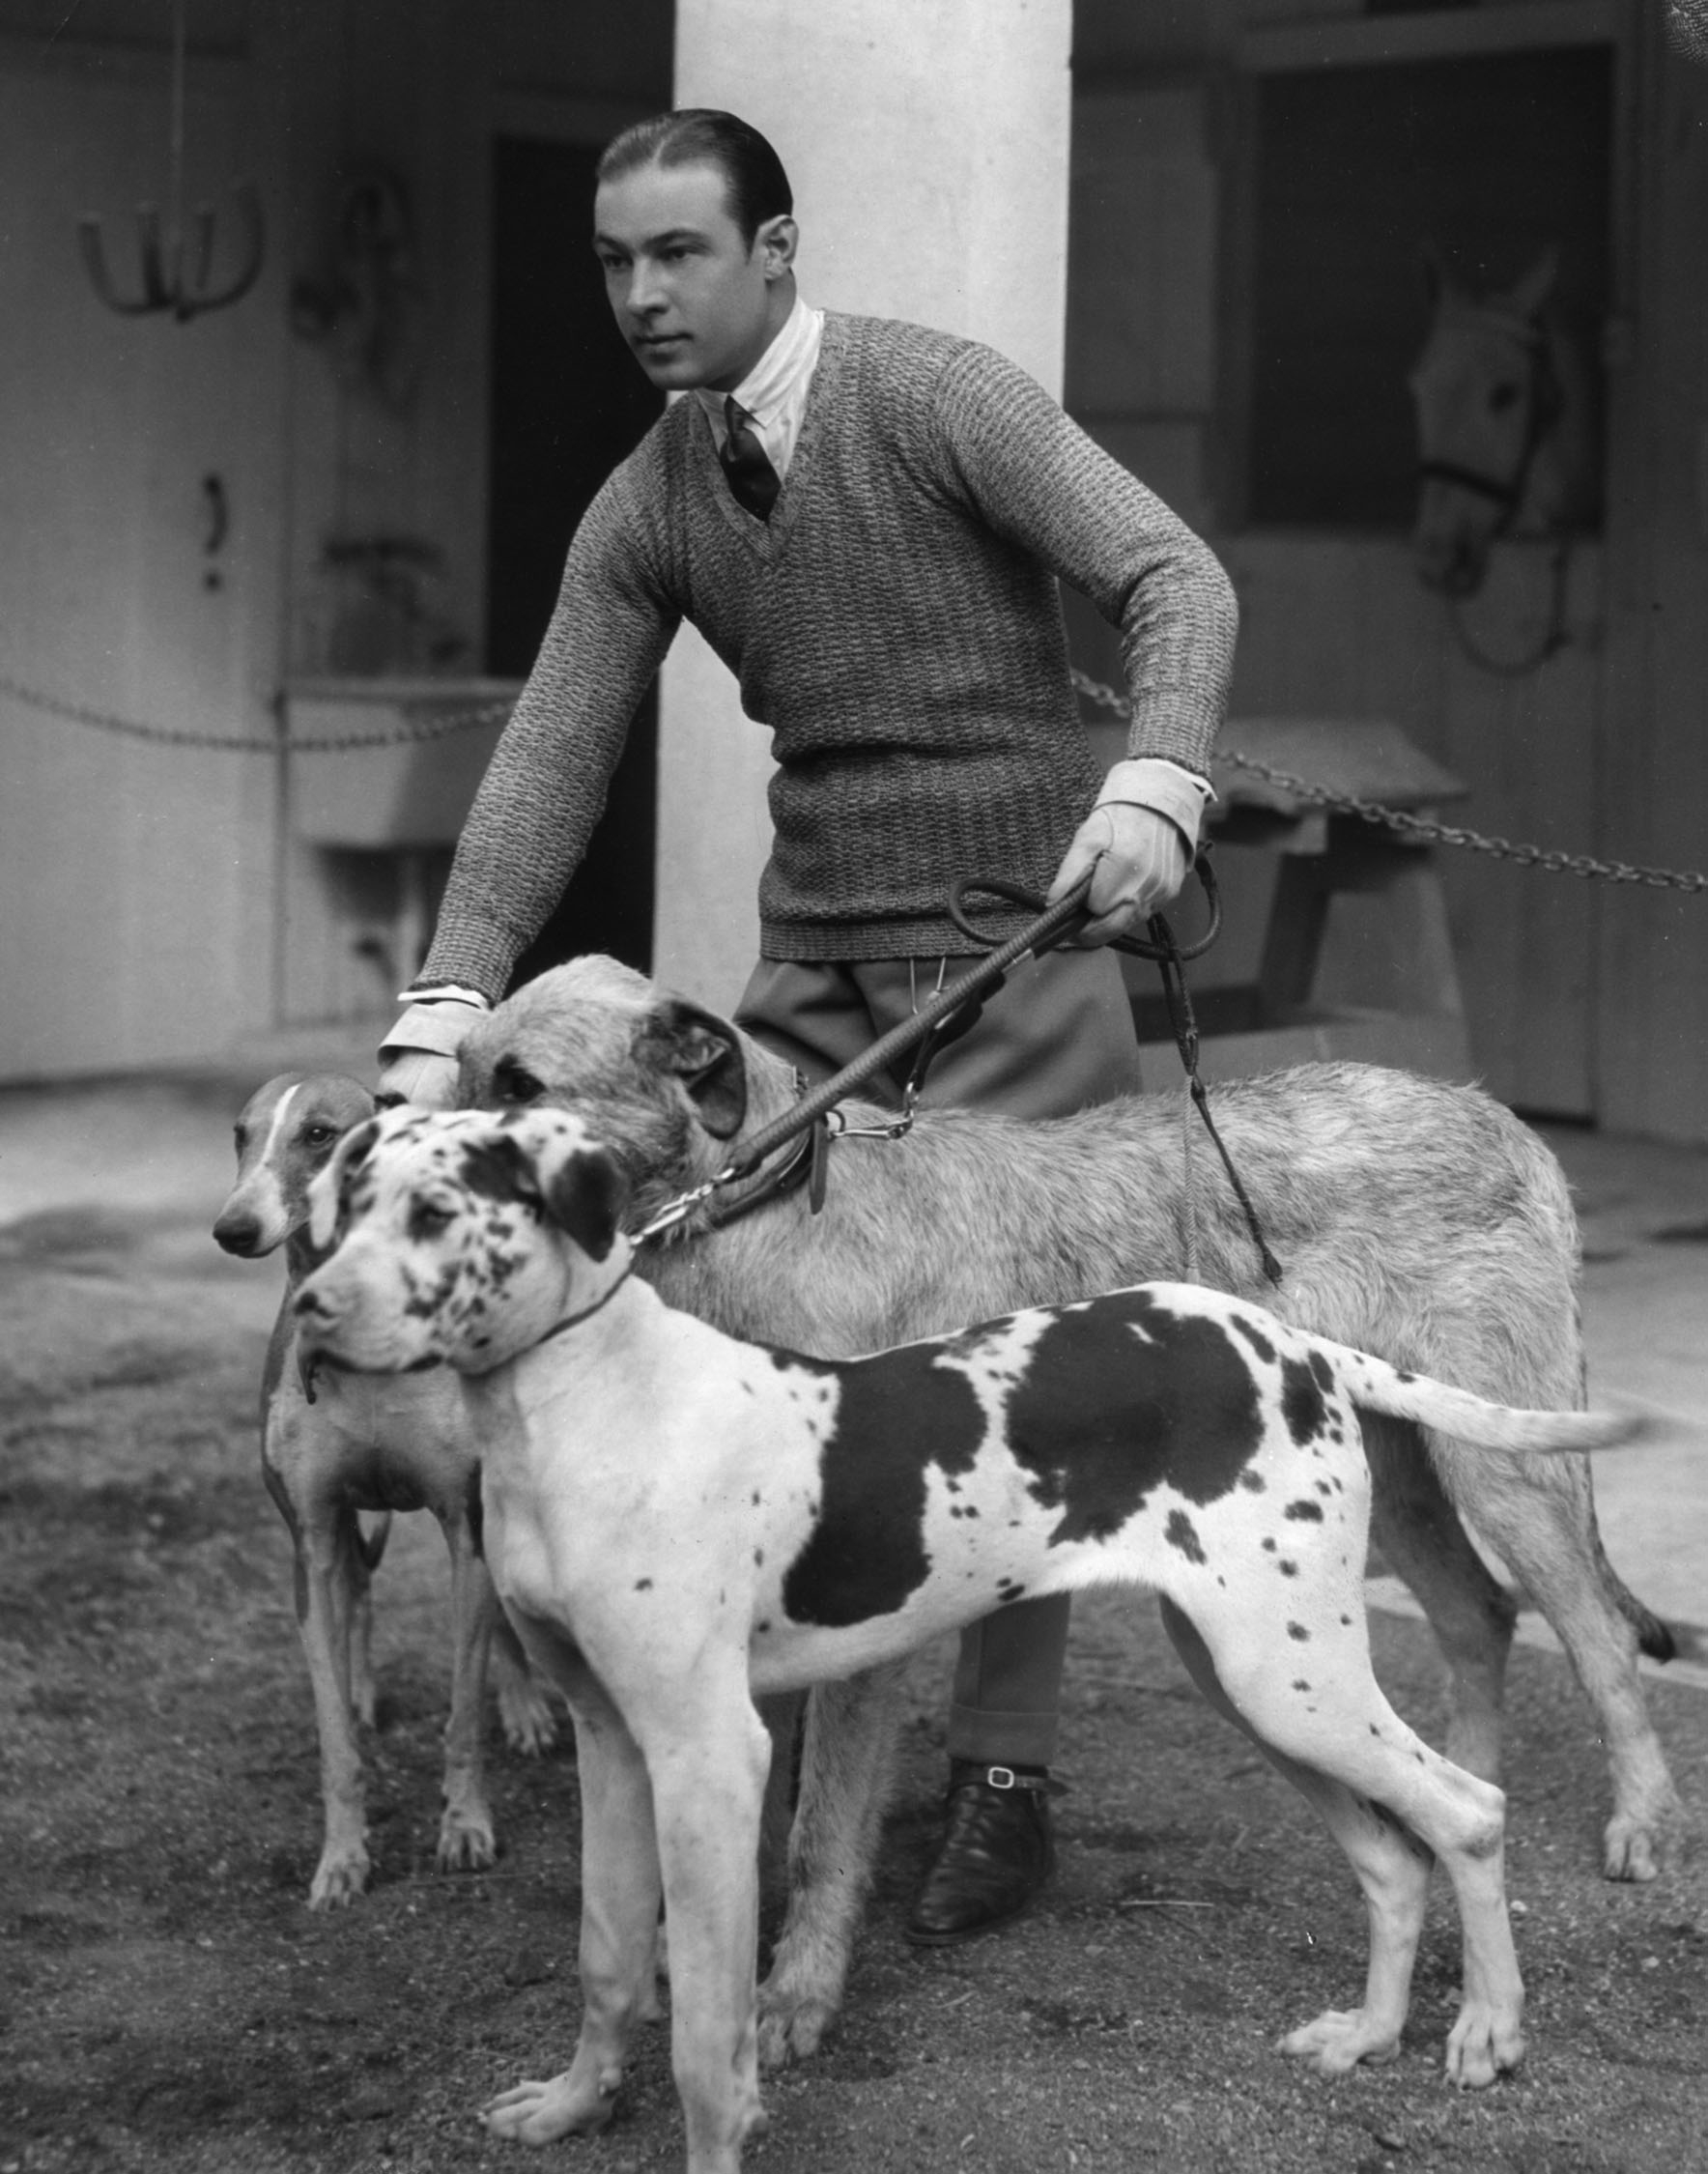 Rudolph Valentino and his dogs. Original caption reads, "Rudolph Valentino has his hands full when he takes three of his favorite dogs for a mornings (sic) walk in the mountains surrounding his new estate in Beverley Hills, California. Left to right the dogs are: Mirtza, an Arabian greyhound, Centaur Pendragon, his Irish wolf-hound, and Shaitan, the great Dane pup. Mirtza and Centaur Pendragon make their screen debut with their master in 'Son of the Sheik' the new Valentino opus for United Artists"